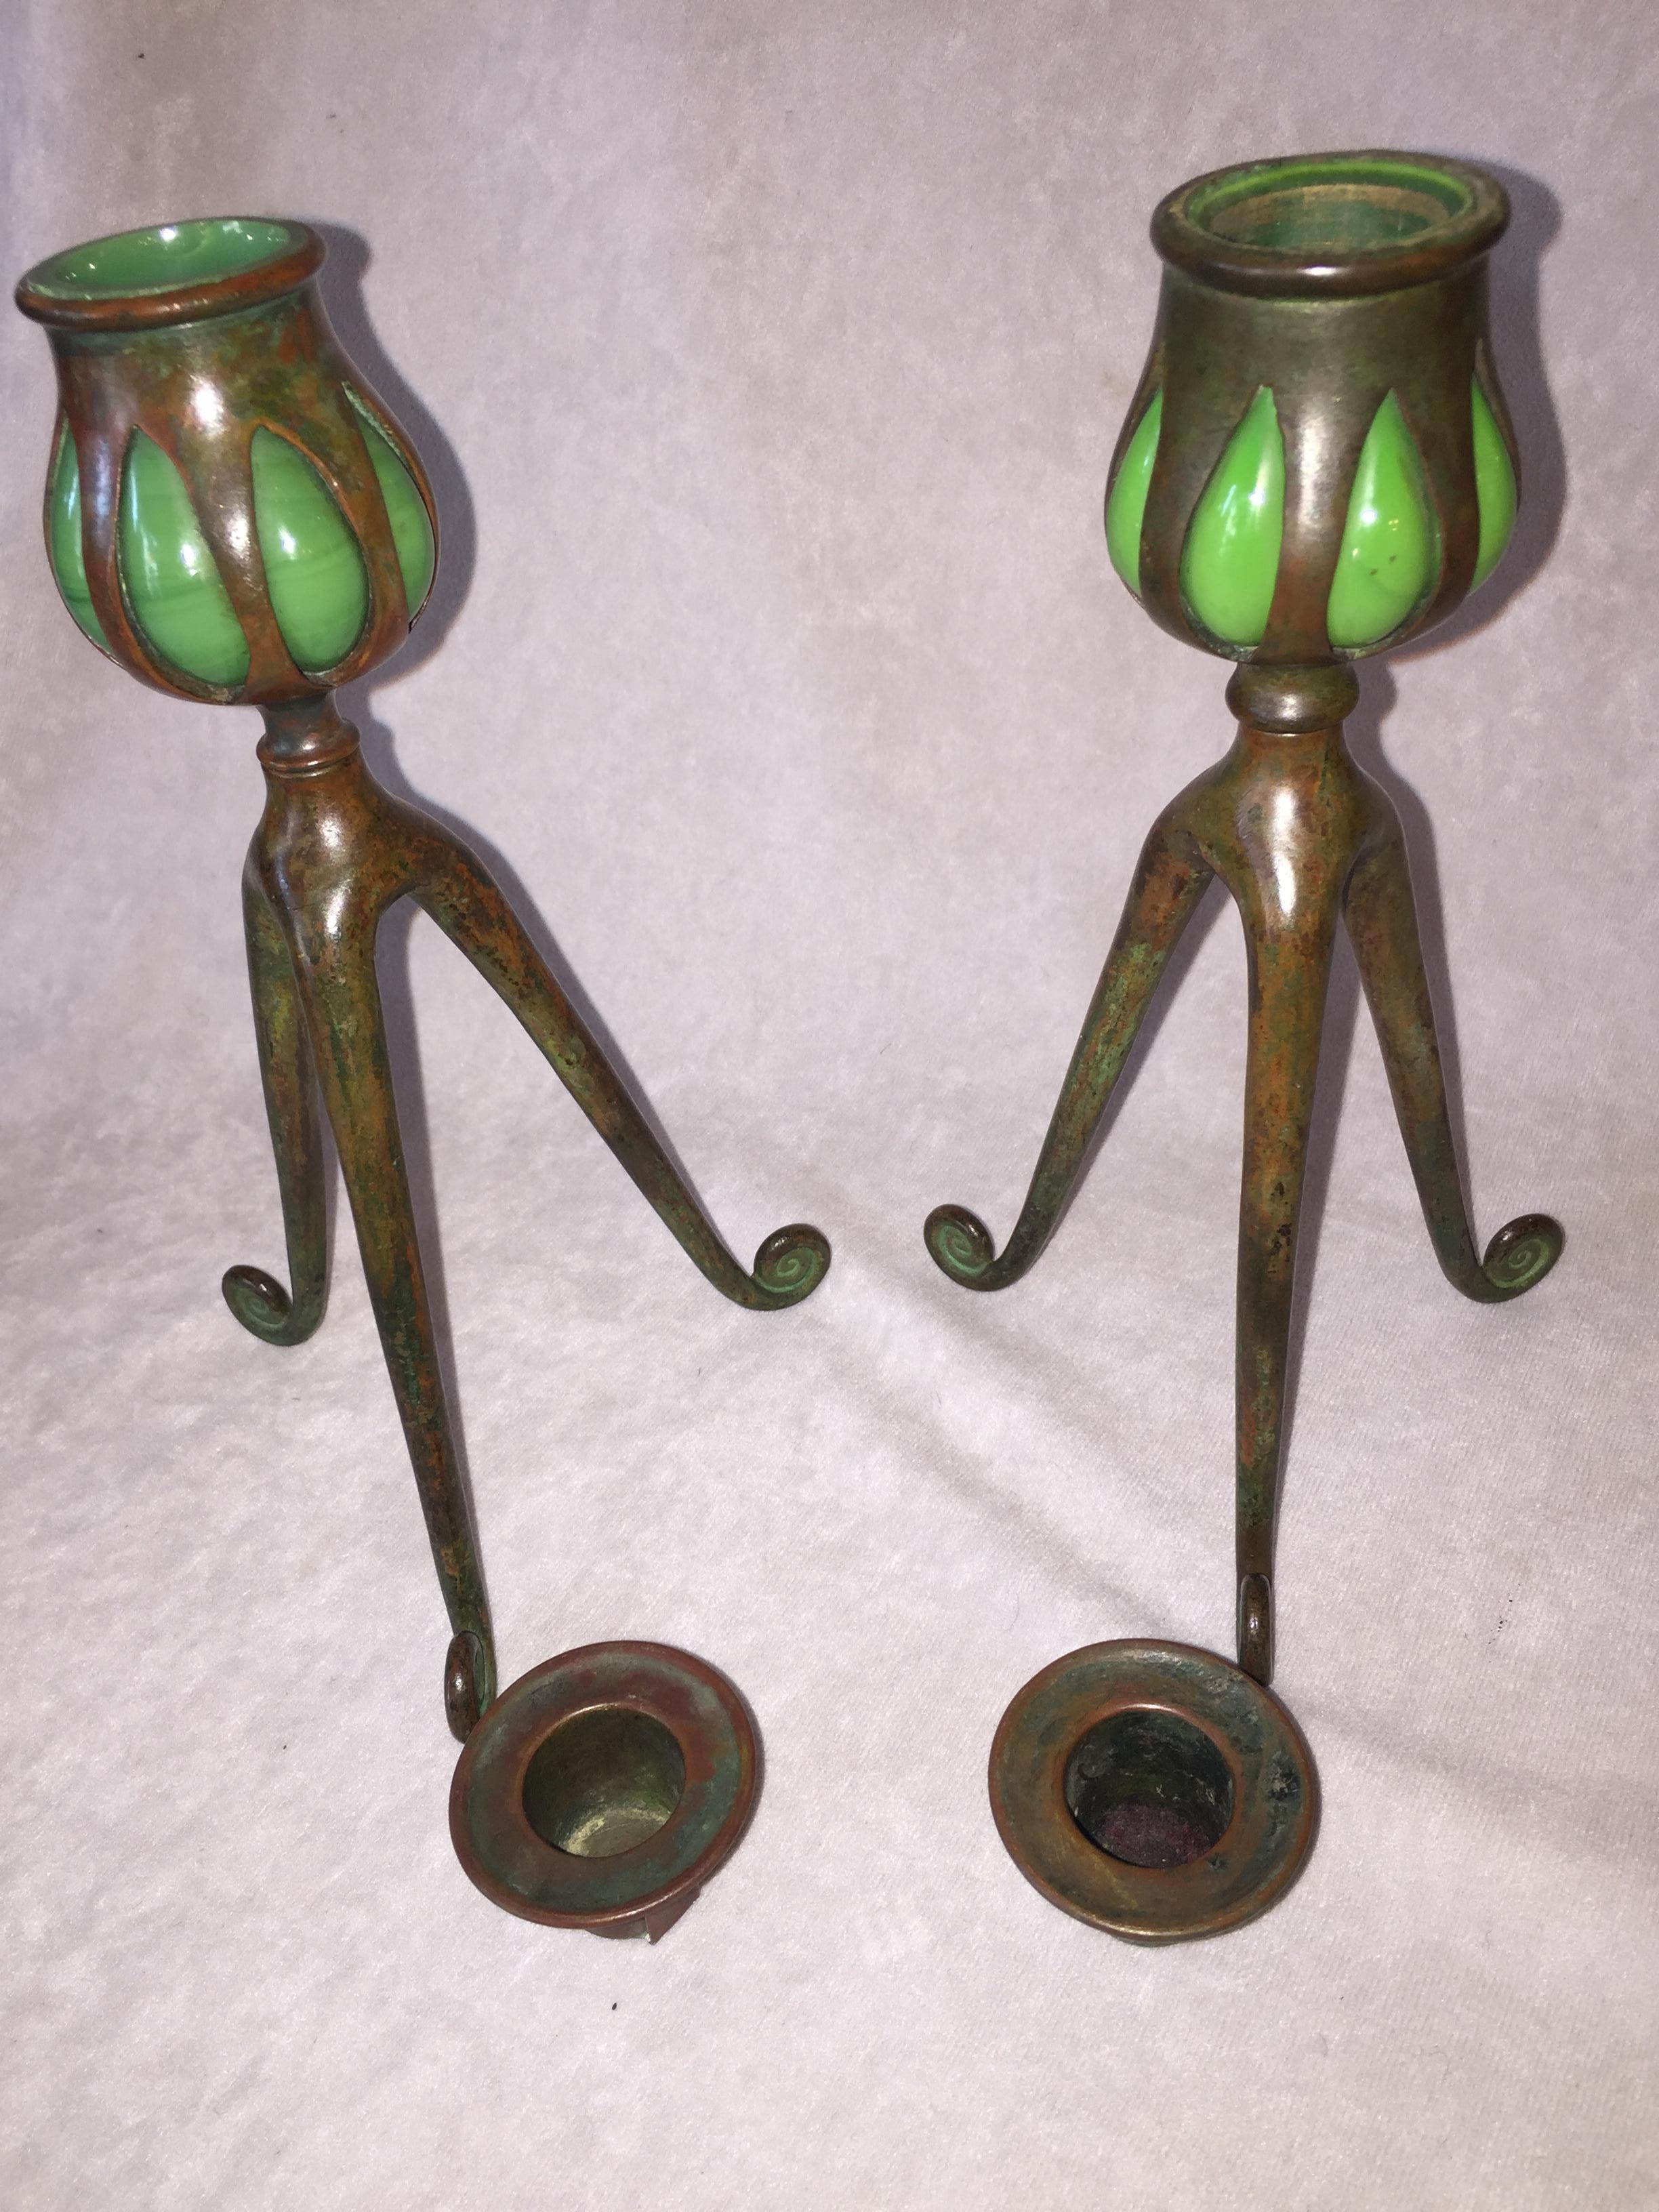 Early 20th Century Pair of Bronze and Green Glass Tiffany Studios Candlesticks, circa 1905